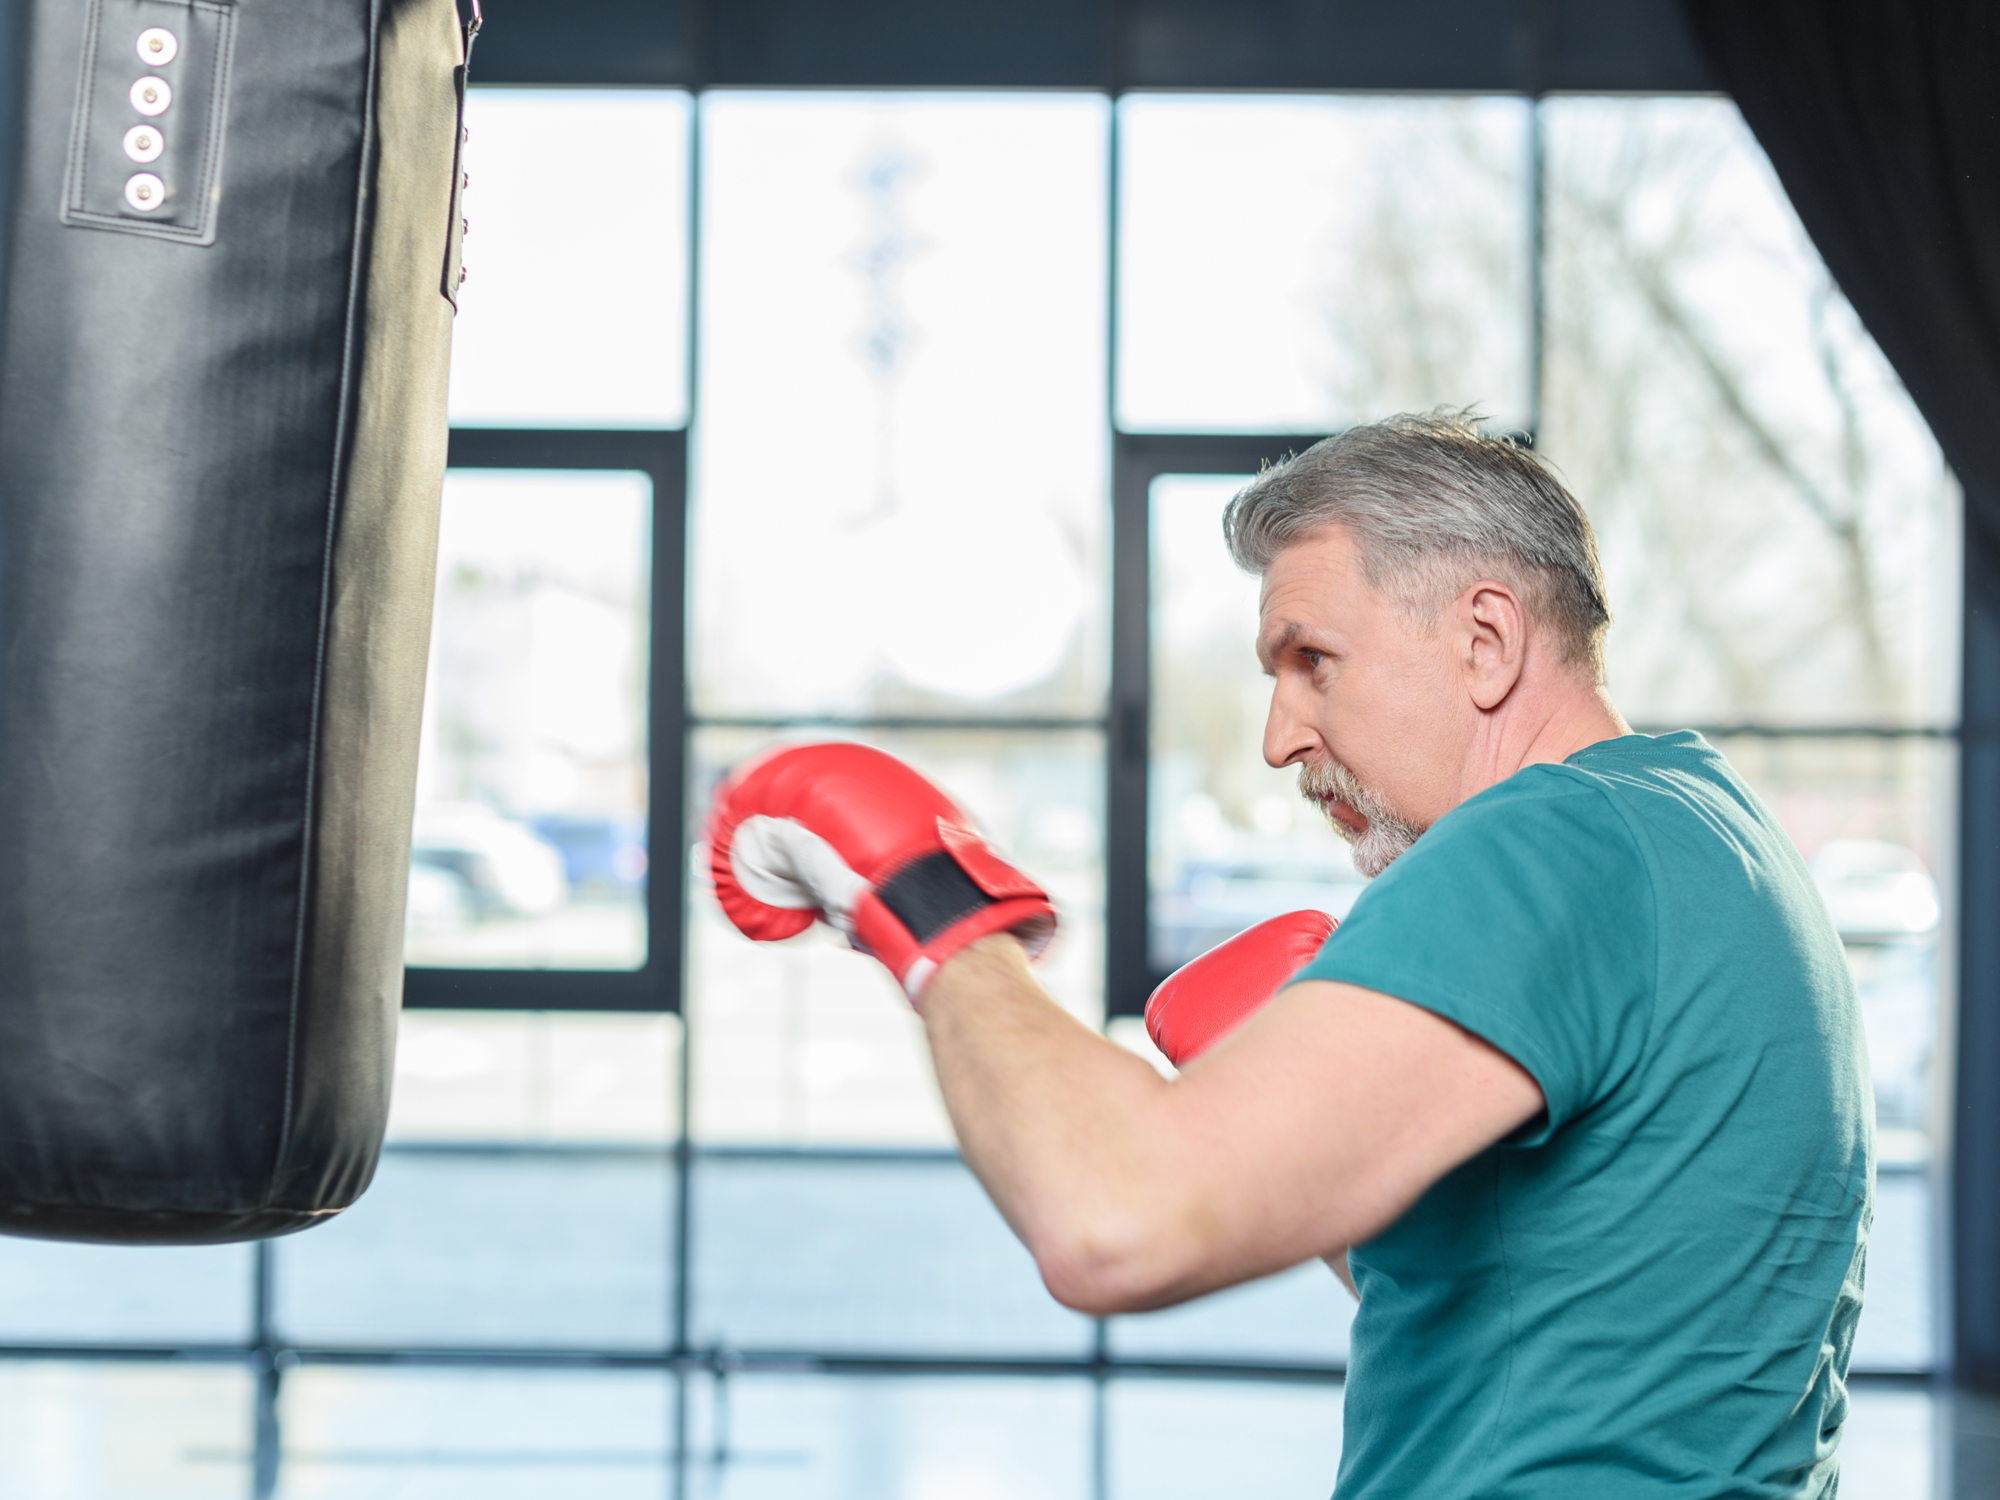 Boxing: The perfect workout